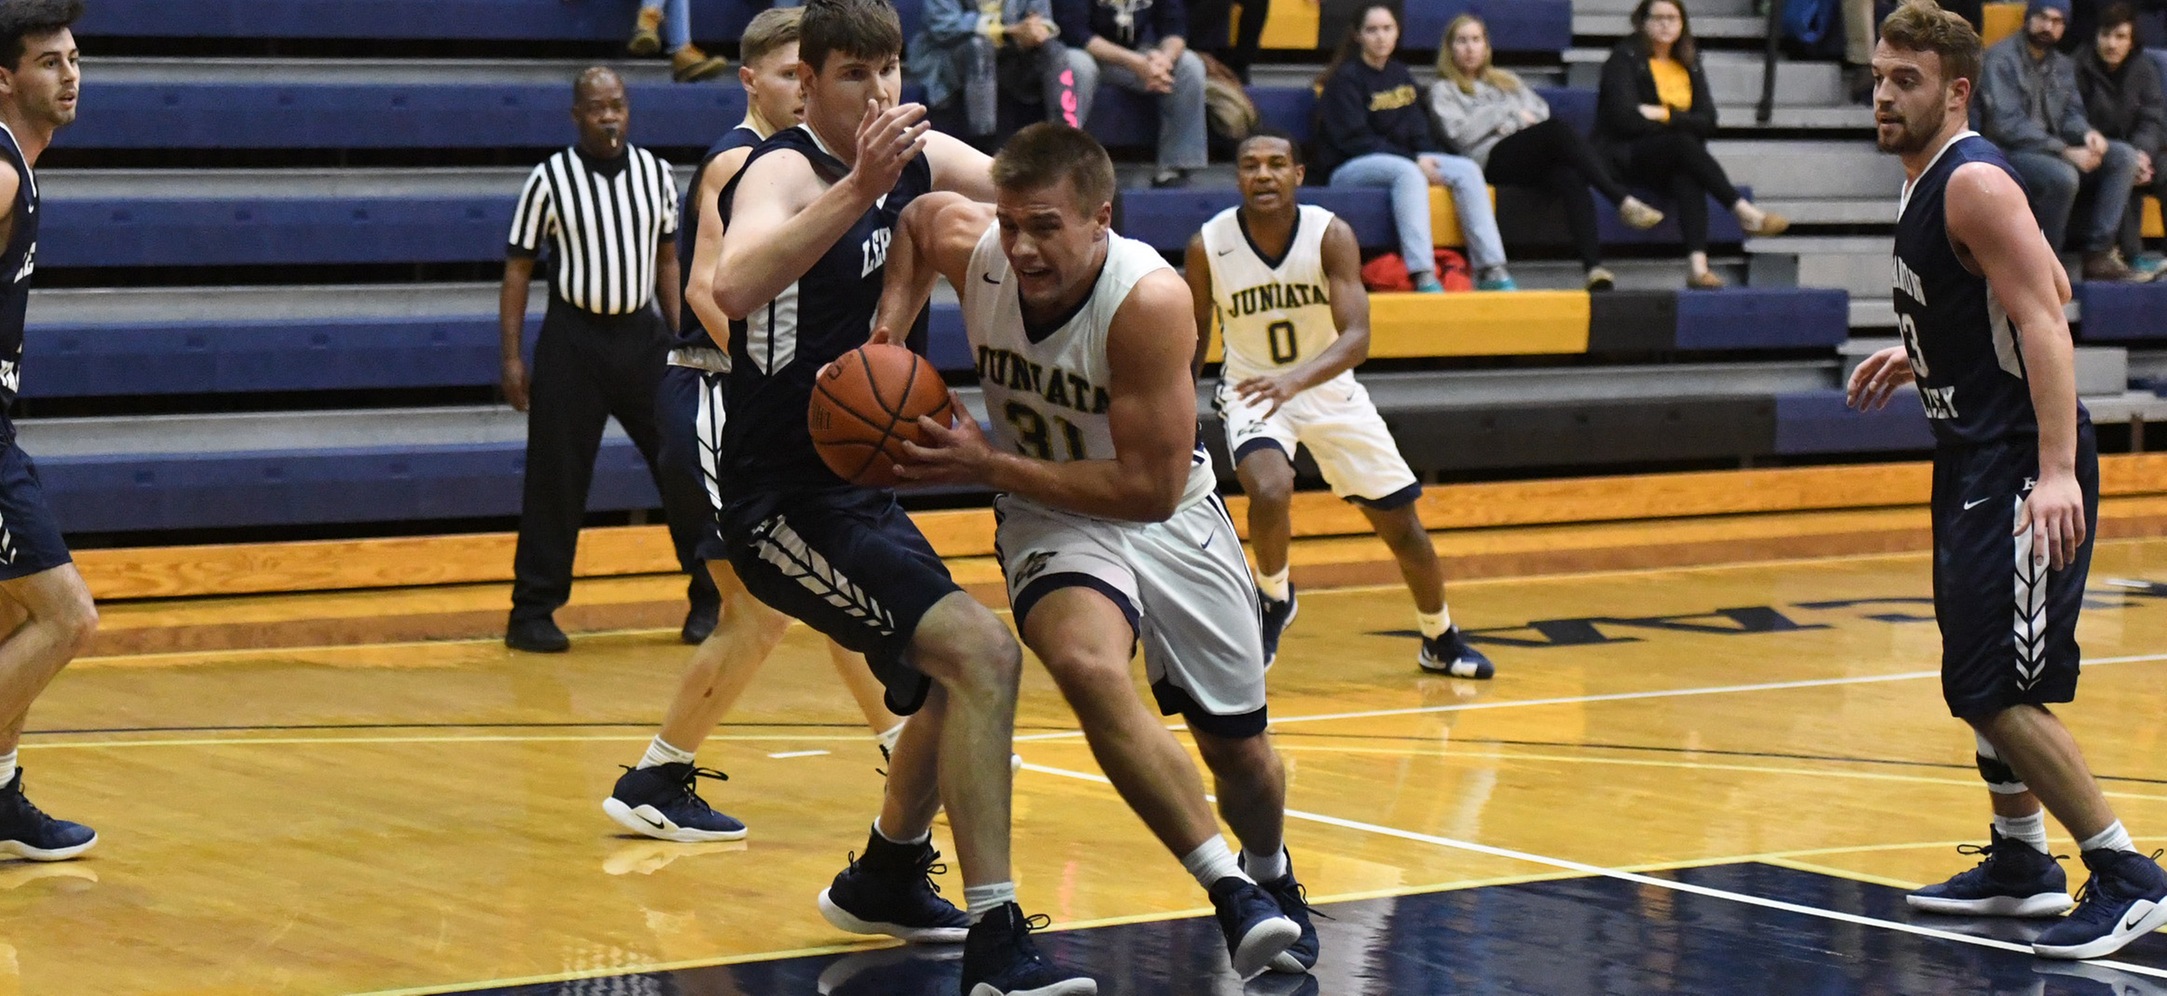 Men's Basketball Loses Tight Contest At Drew